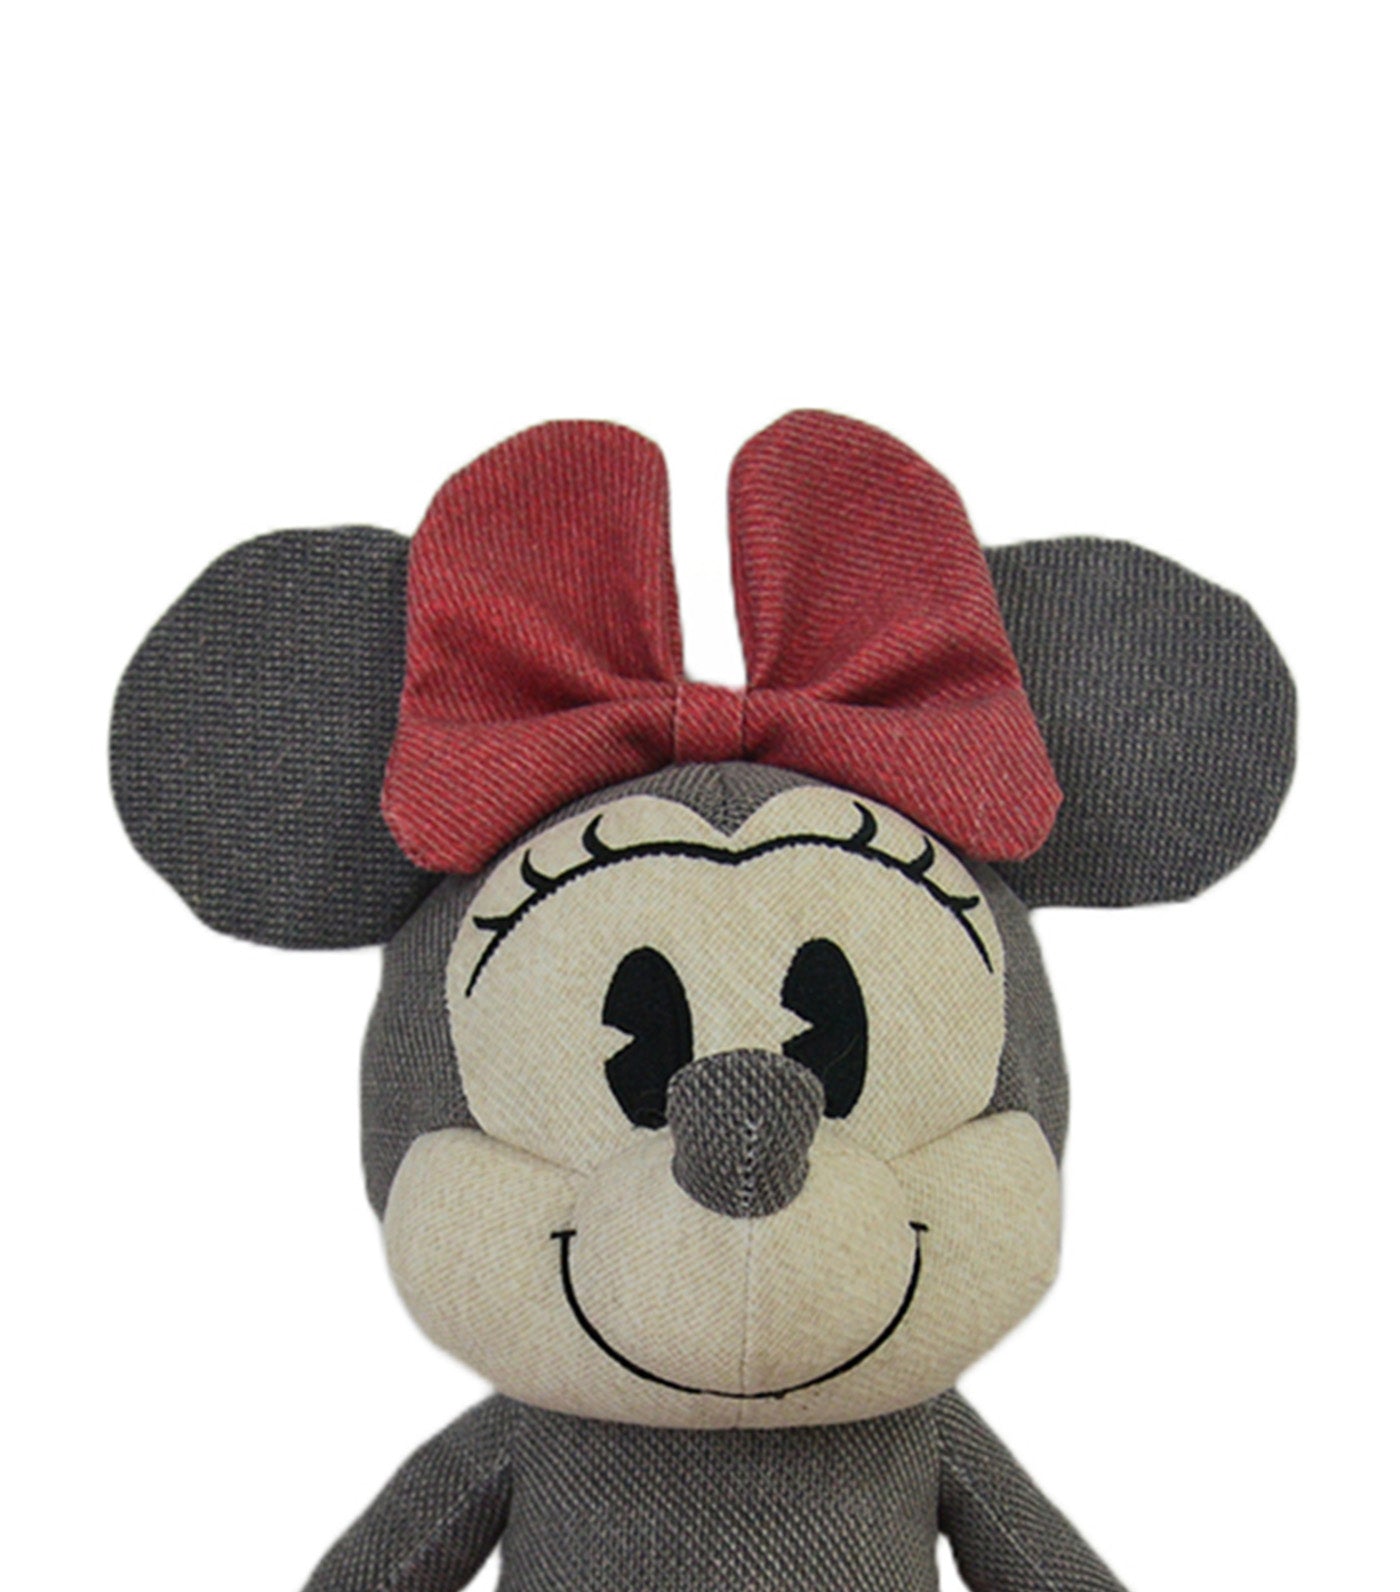 D100 Vintage Collection Minnie Mouse Plush - 8in